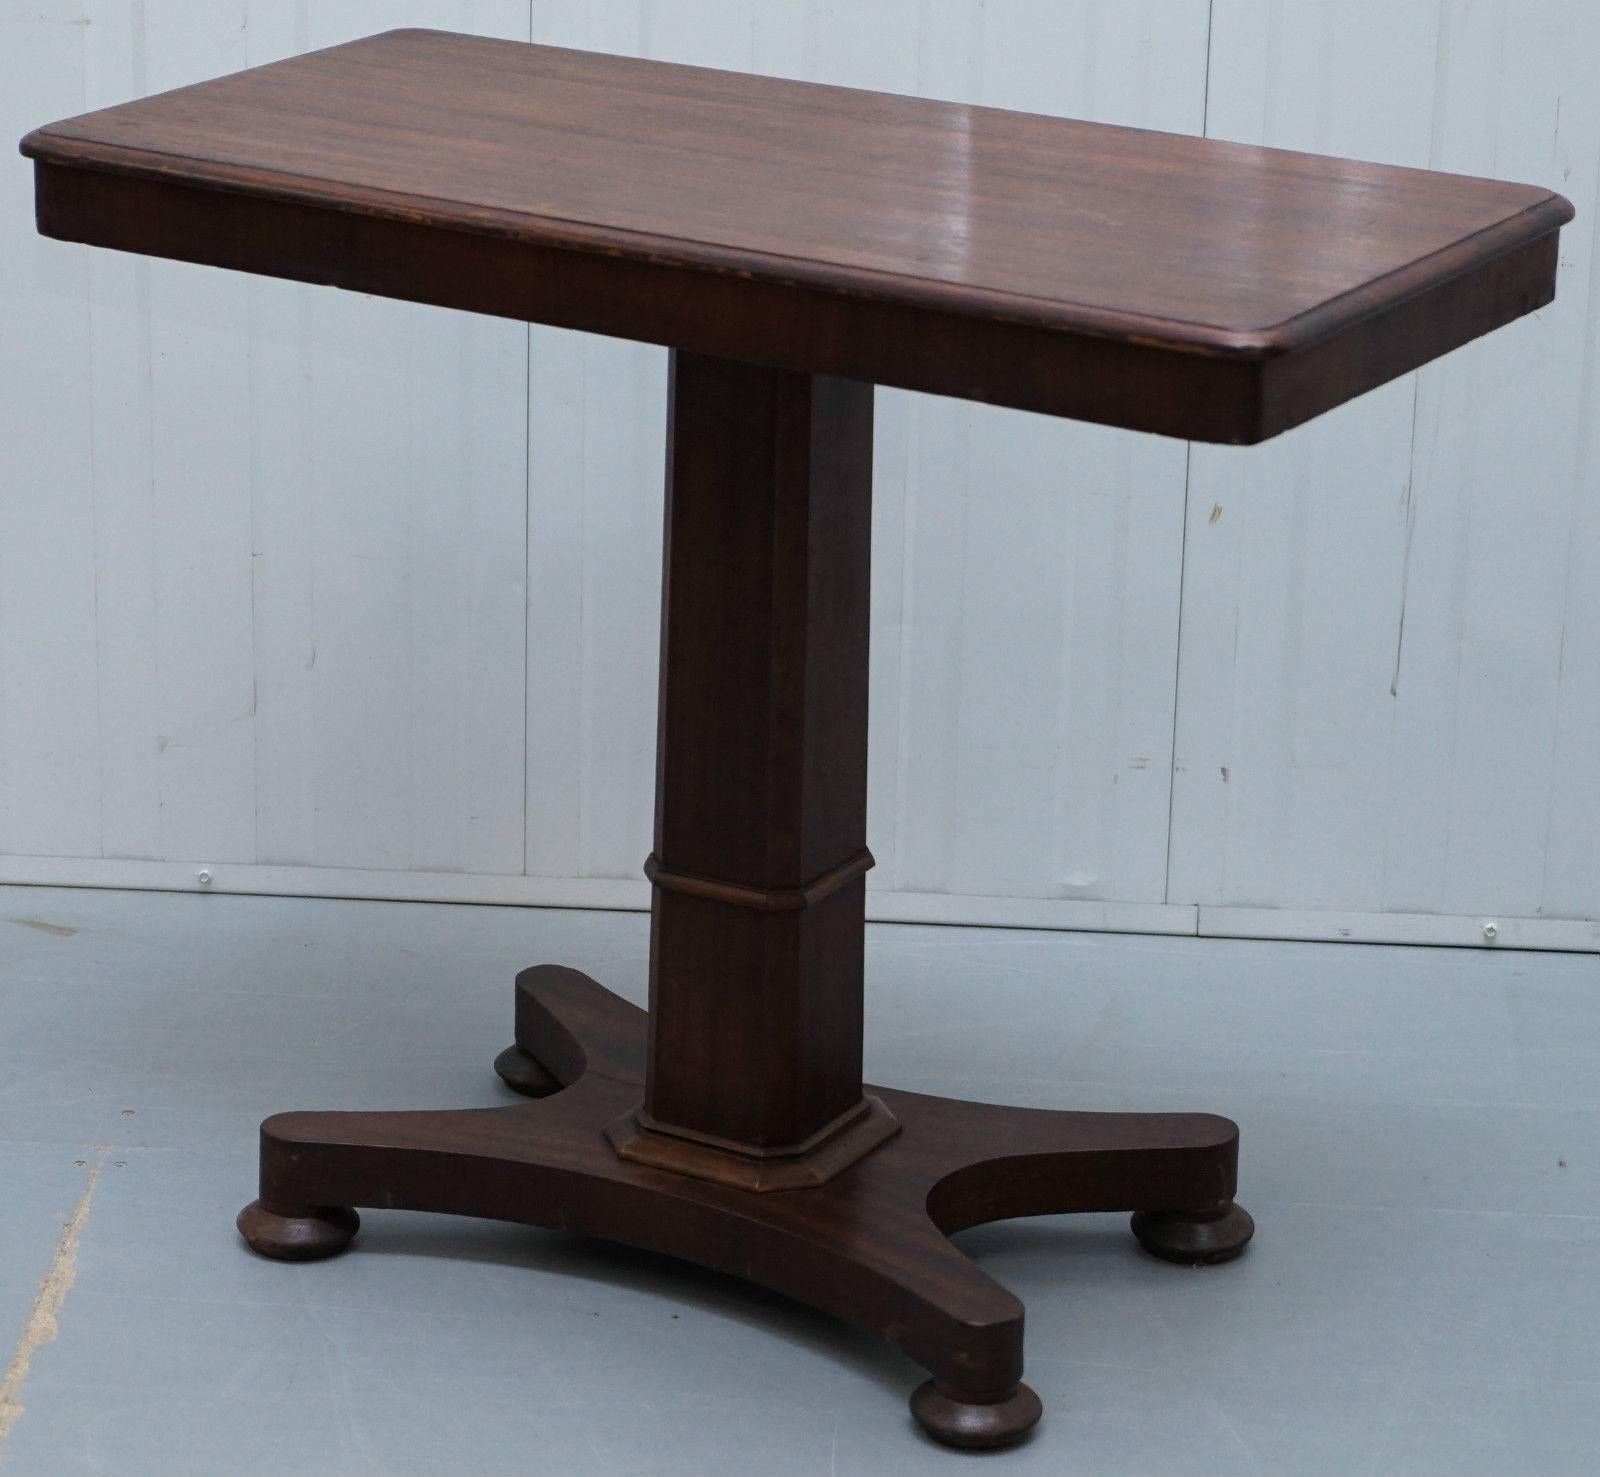 We are delighted to offer for sale this absolutely lovely solid mahogany Victorian height adjustable with sliding top console reading table

A lovely piece, I actually bought it for my mother in law to sit next to the bed and when she wanted to